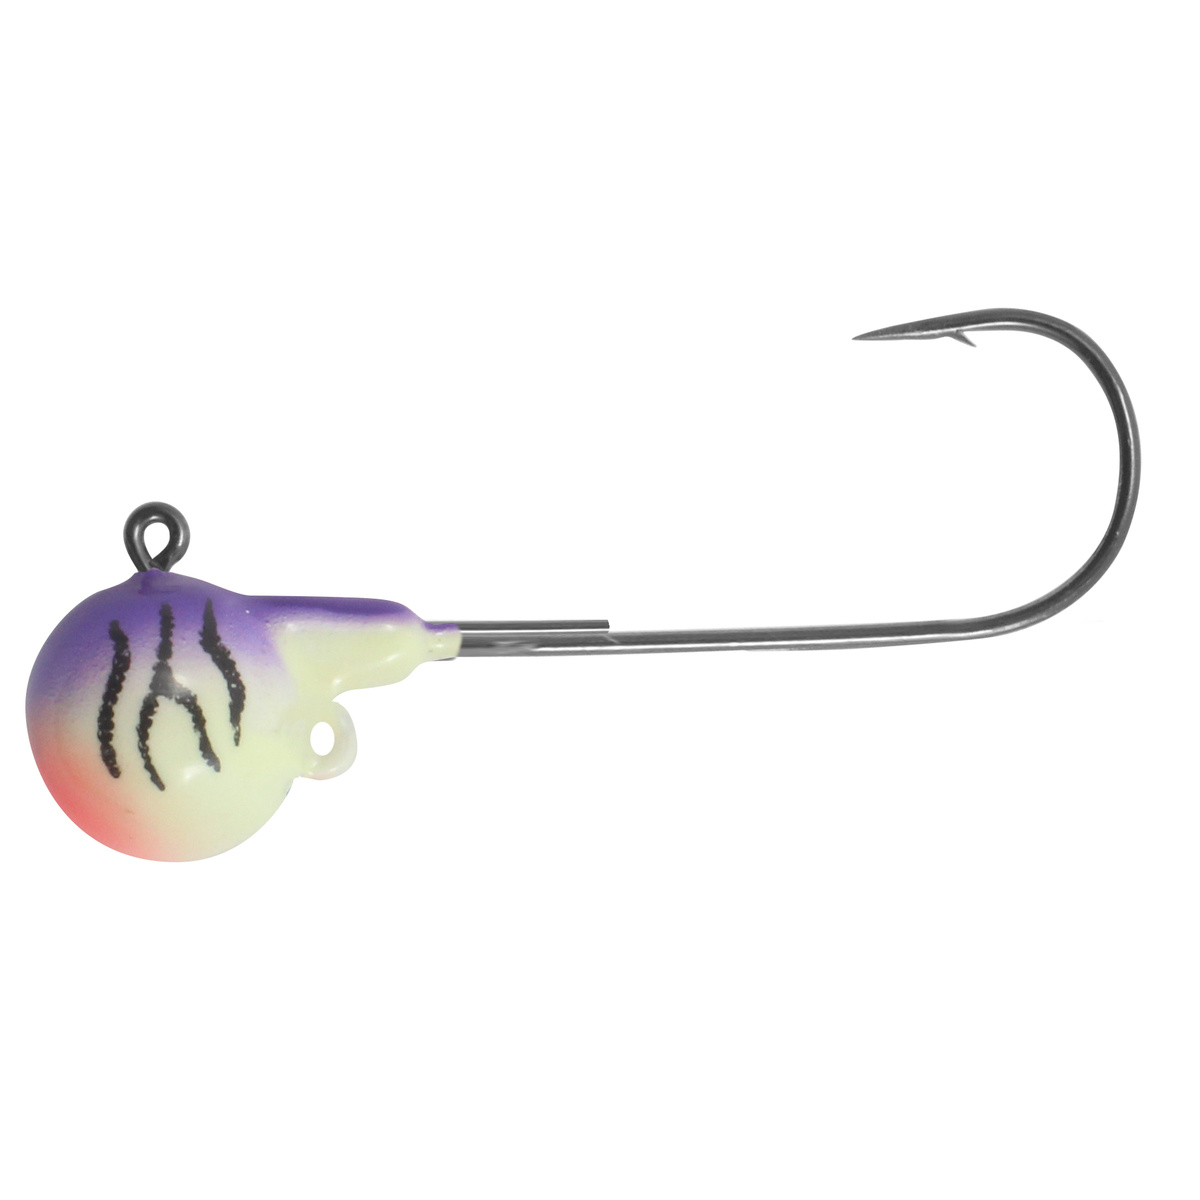 Kalin's Google Eye Tungsten Search Bait, Seek and Destroy! The Kalin's  Google Eye Tungsten Search Bait was designed to fish while using  Electronics “Live technology” to cover water quickly and